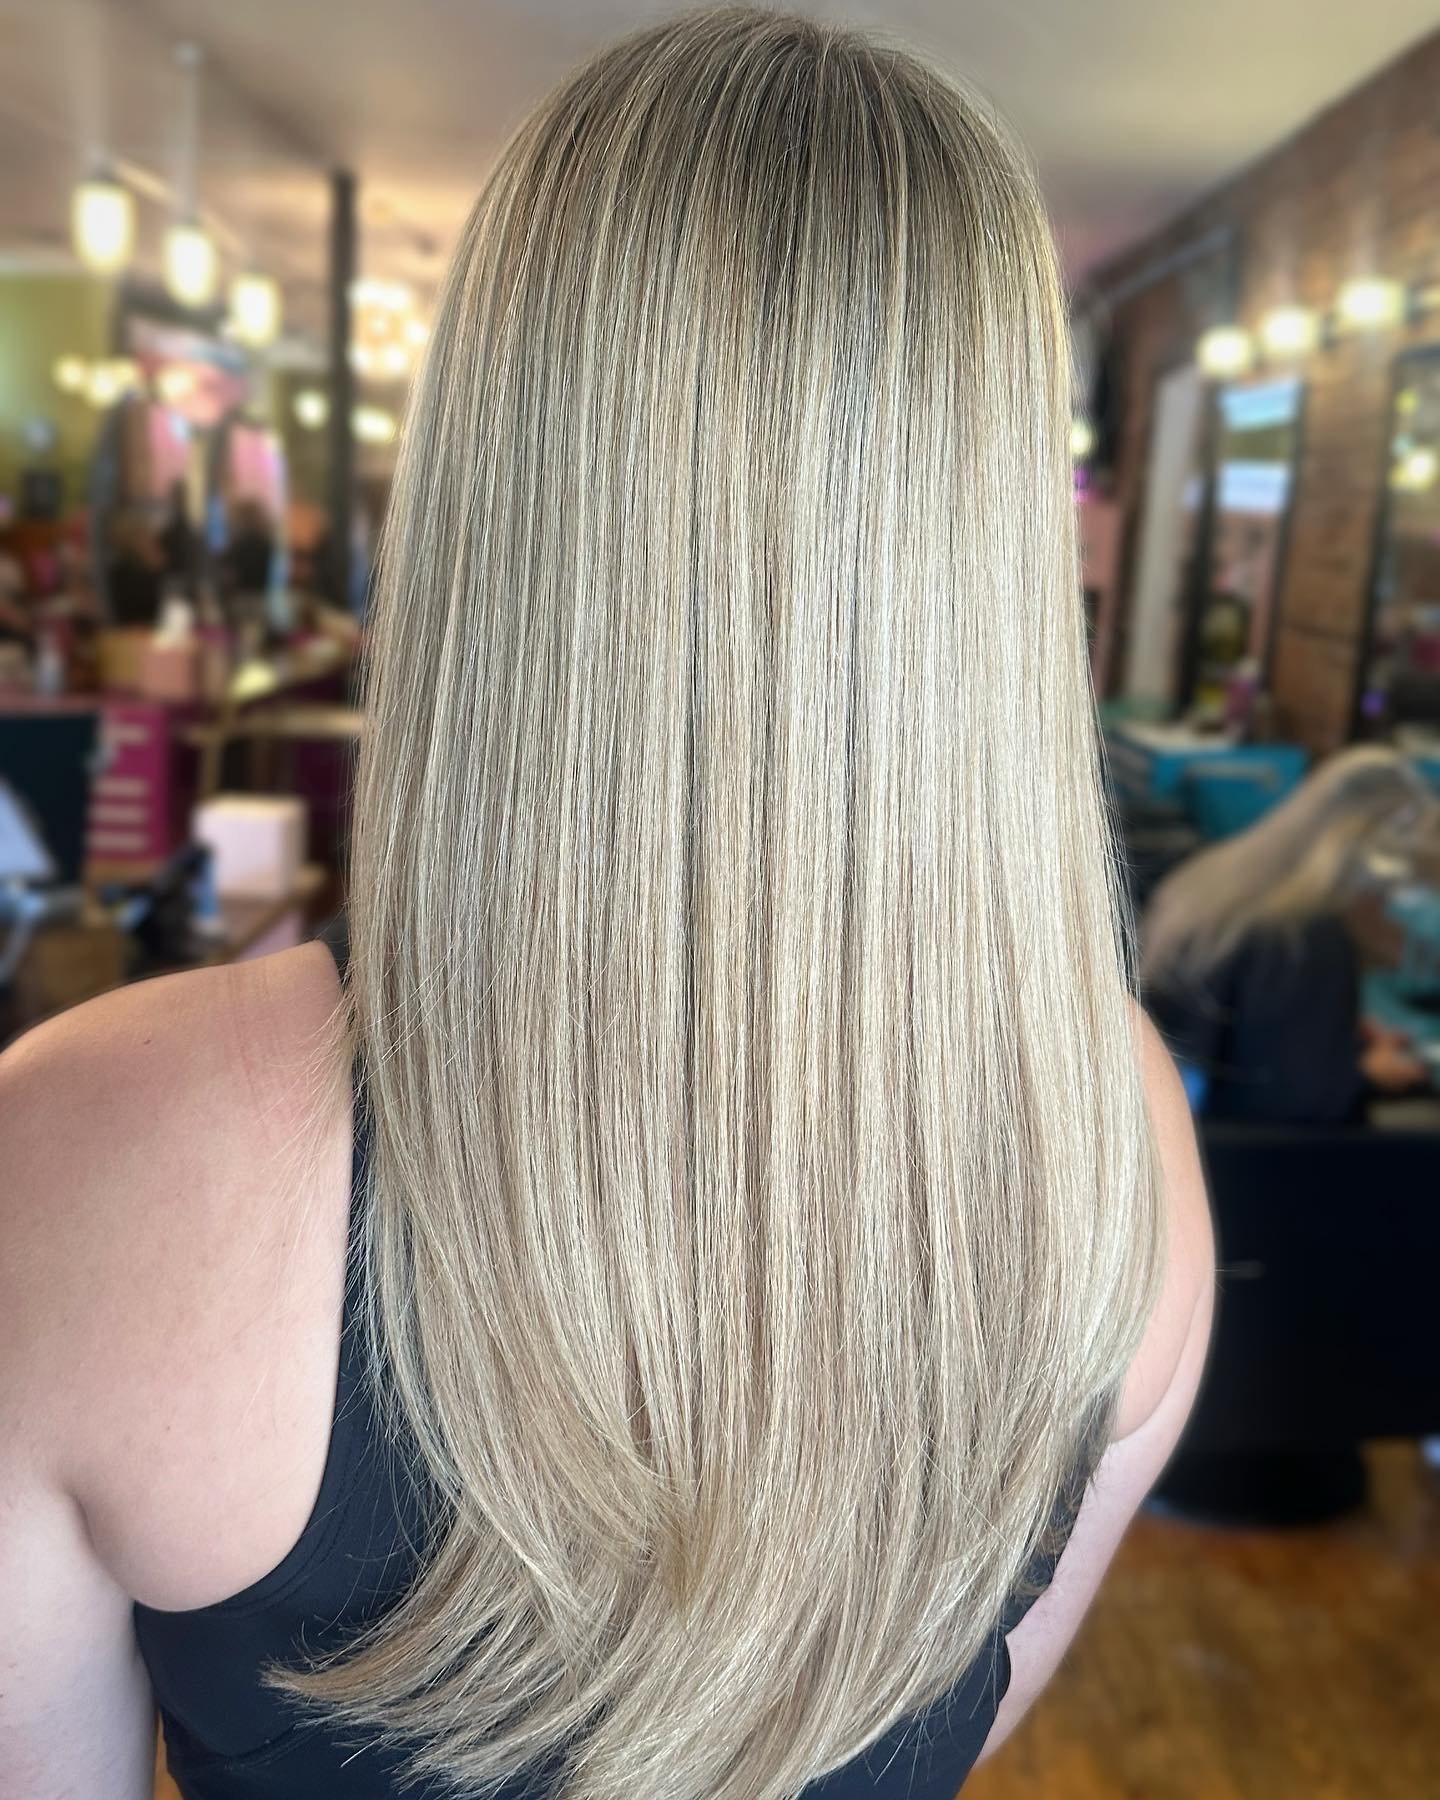 Your blonde should look just as blended &amp; even straight as it does curled 🙌🏻 

#chachasalon #lex #lexky #lexington #lexingtonky #lexingtonhair #lexingtonhairstylist #ky #kyhair #kyhairstylist #universityofkentucky